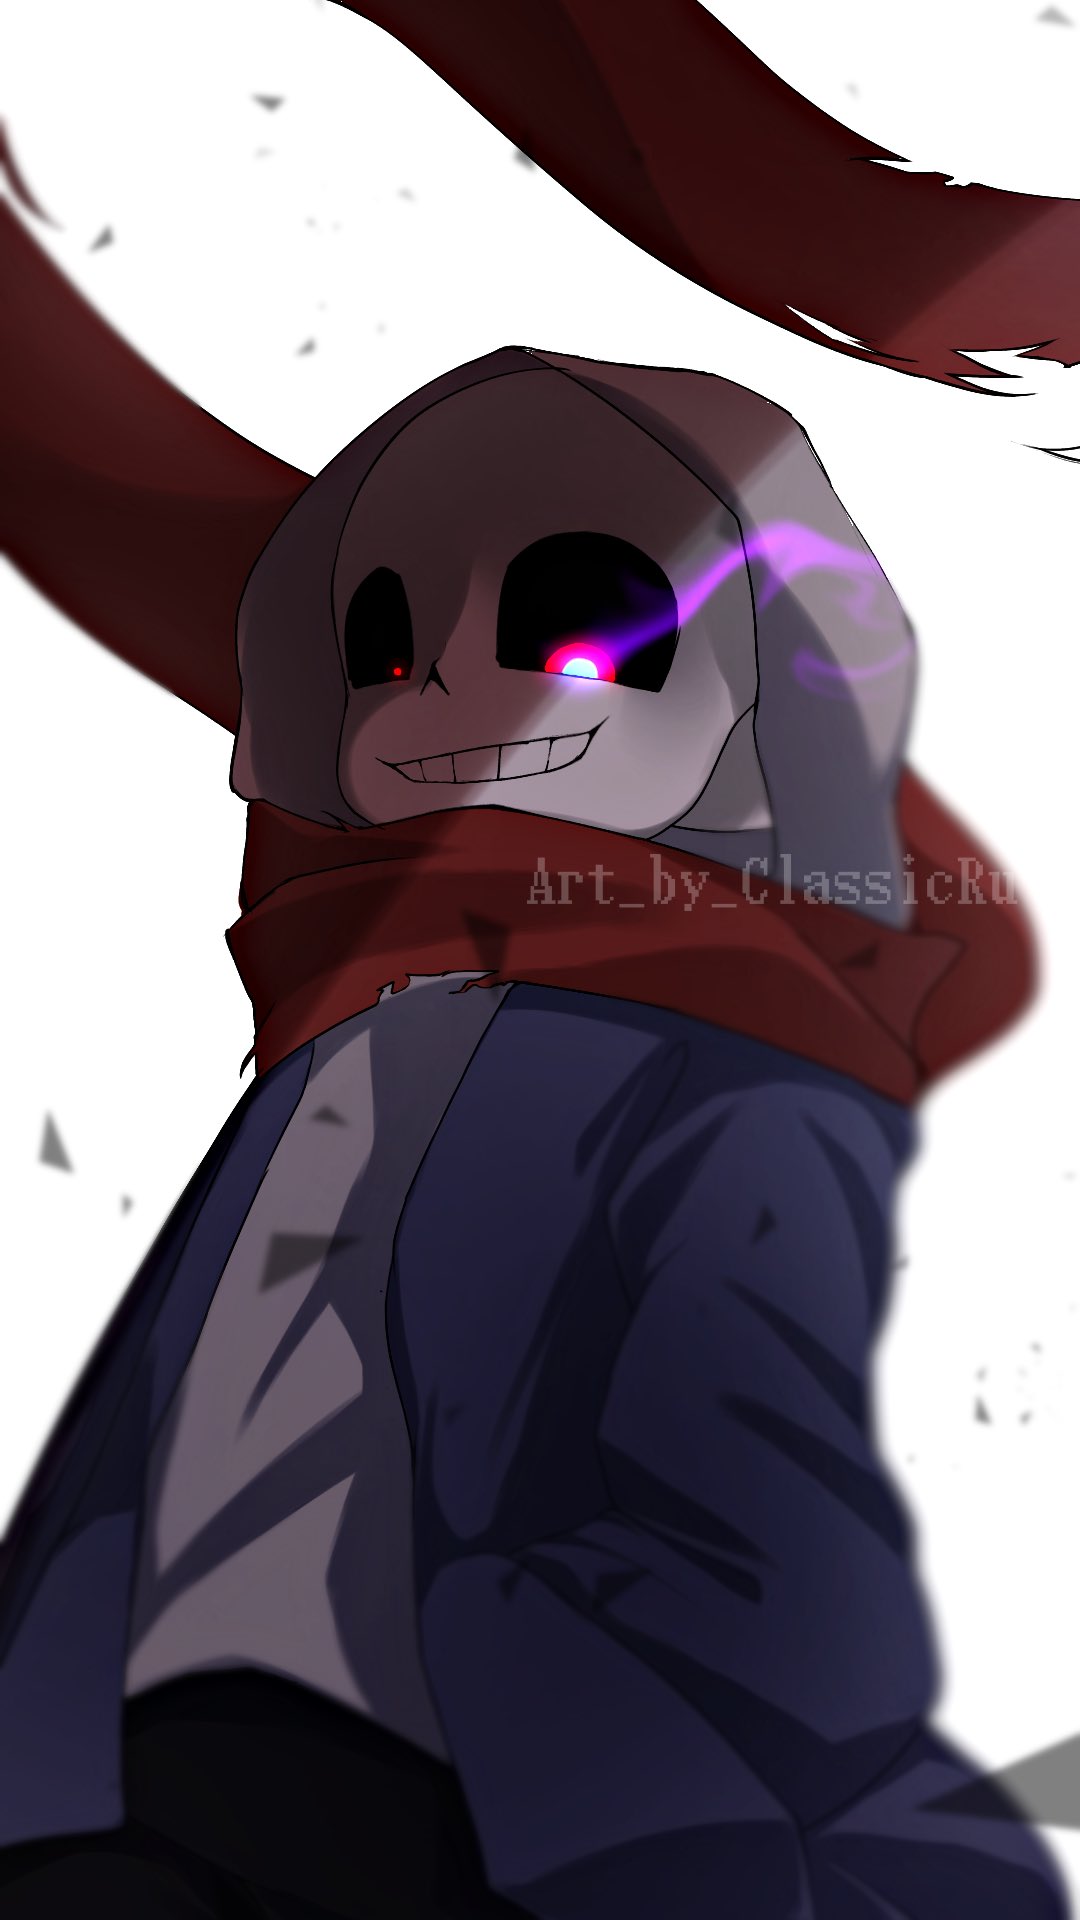 Classic_Ru on X: Dust sans! Requested by @mellowthefox Hope you